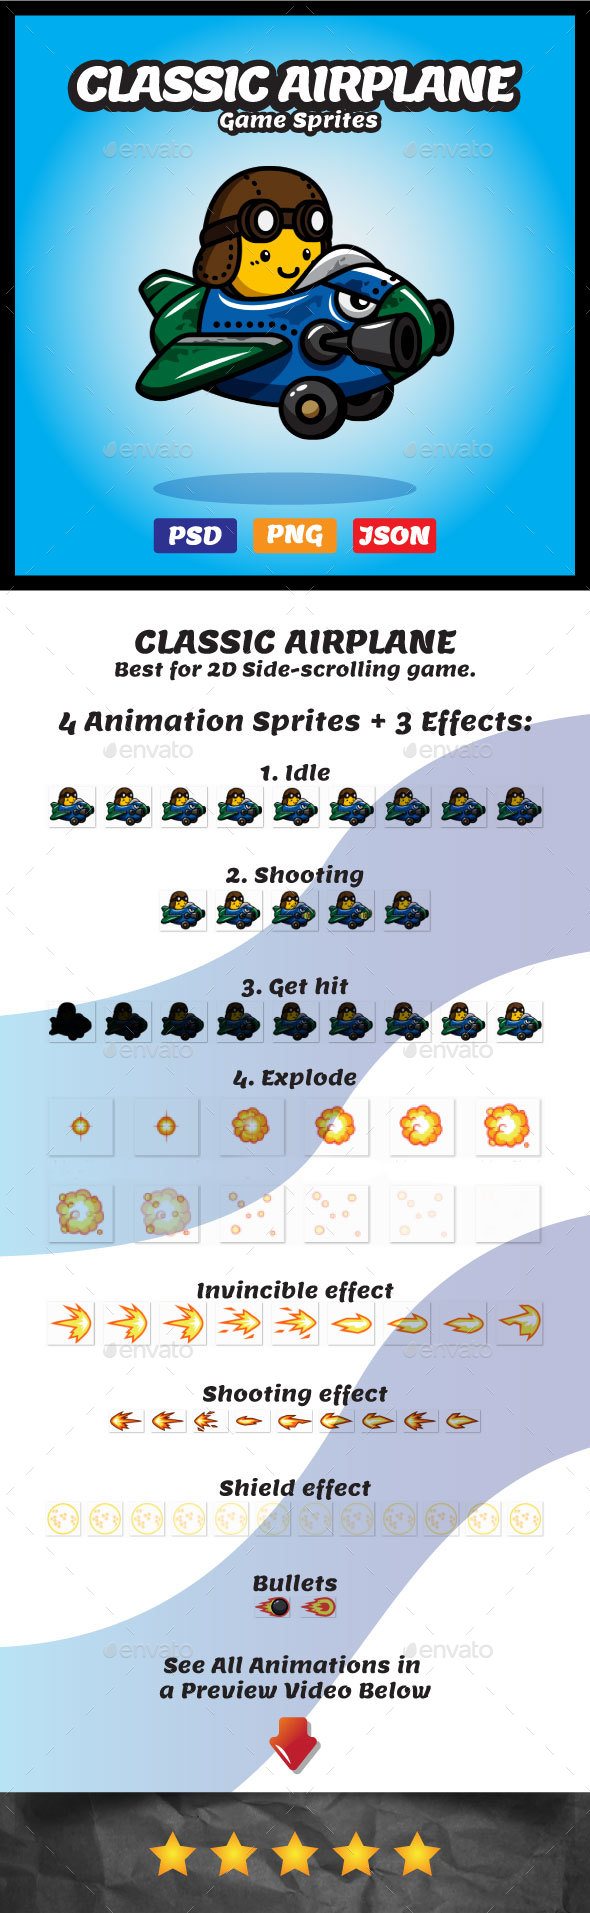 Graphics: 2d 2d Game Asset Adventure Aircraft Airplane Asset Cartoon Character Classic Airplane Classic Plane Game Plane Sheet Side Simple Sky Spacecraft Spaceship Sprite Sheet Sprites Video Game Wing